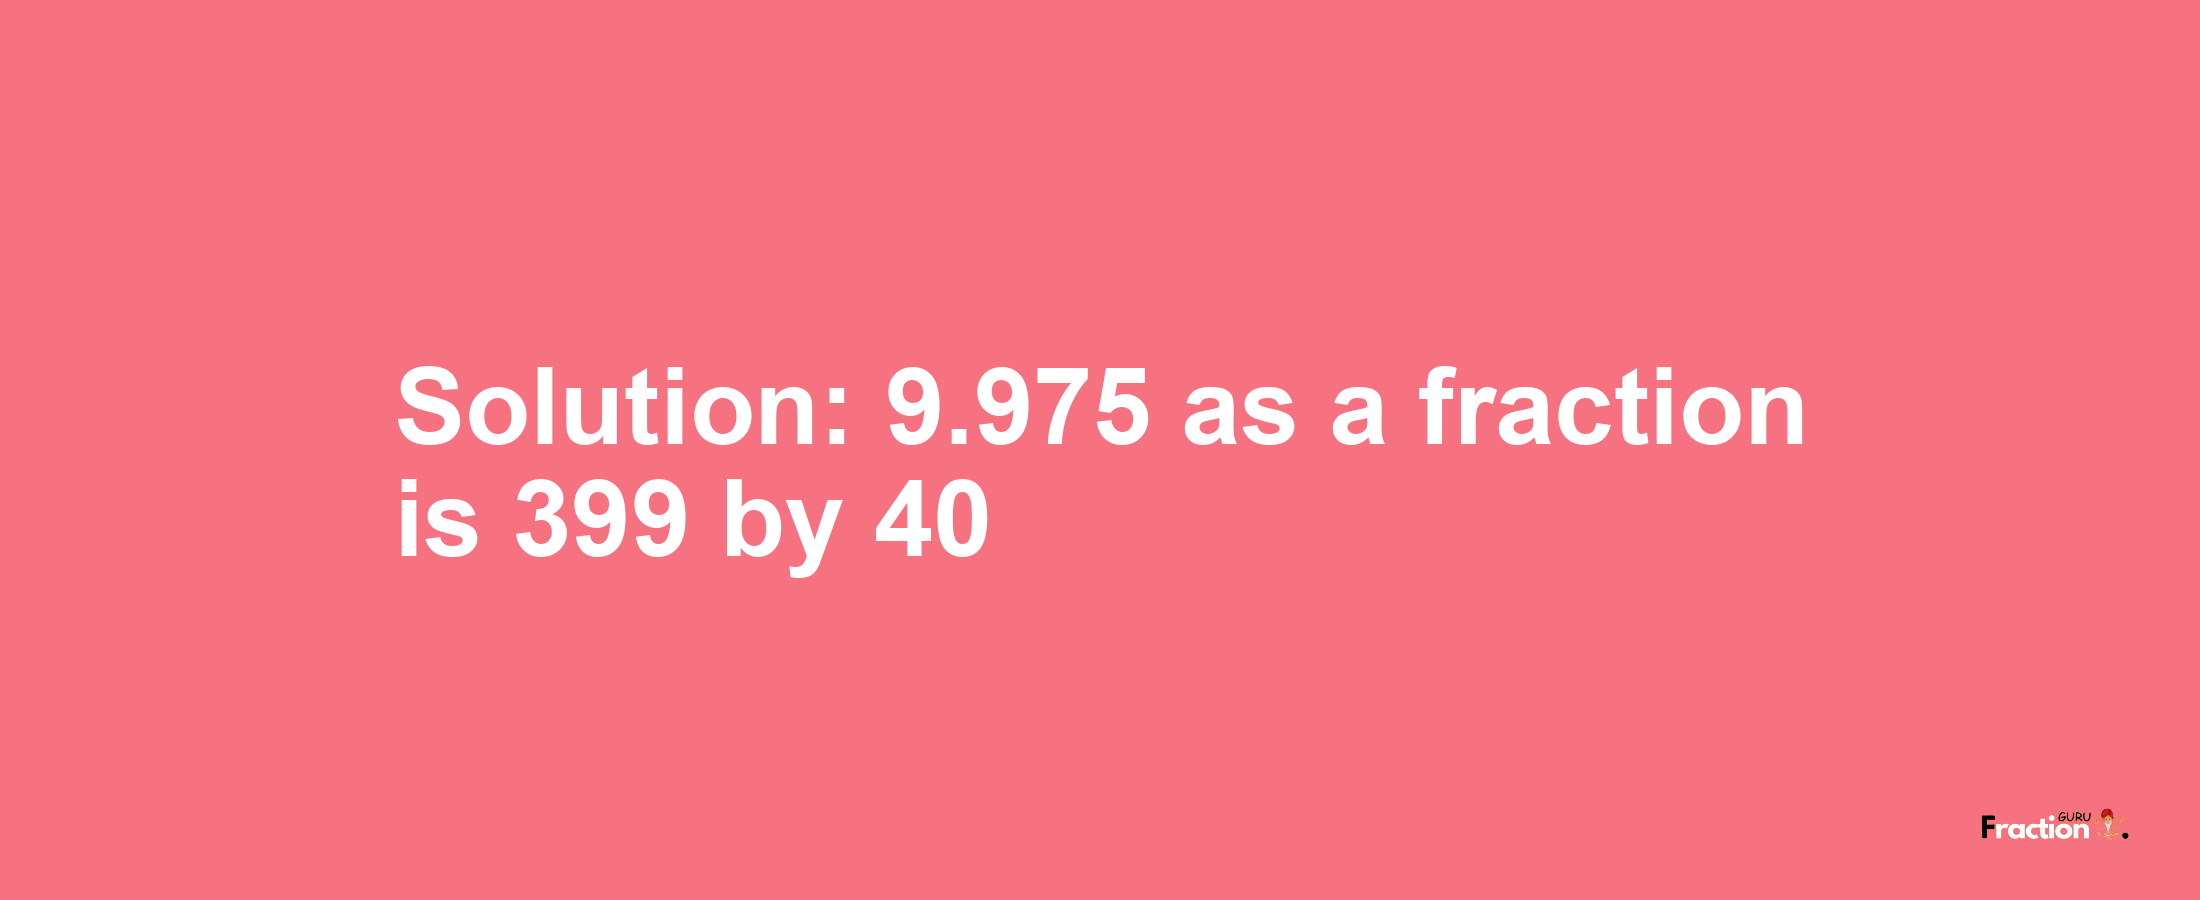 Solution:9.975 as a fraction is 399/40